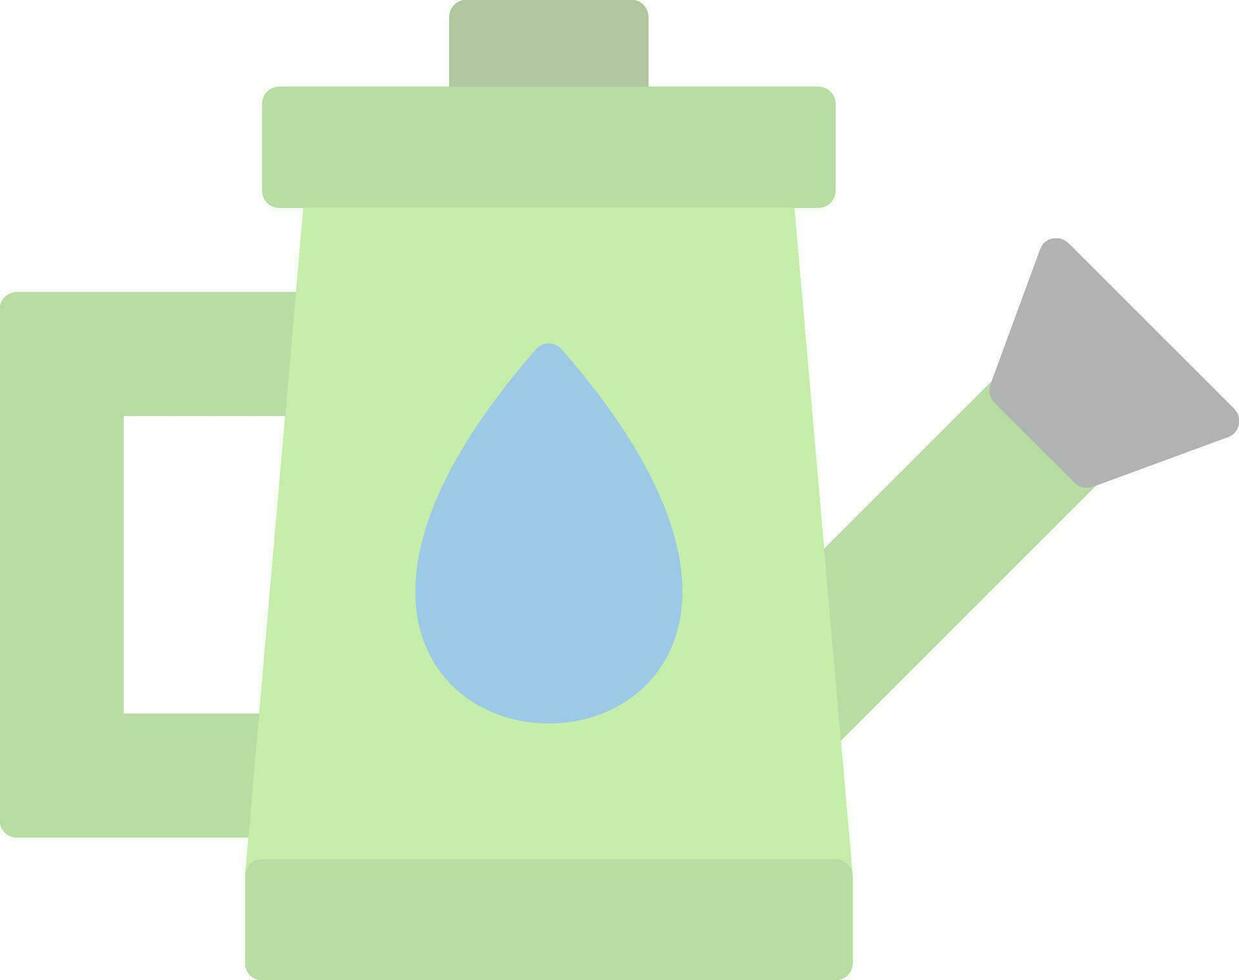 Watering Can Vector Icon Design